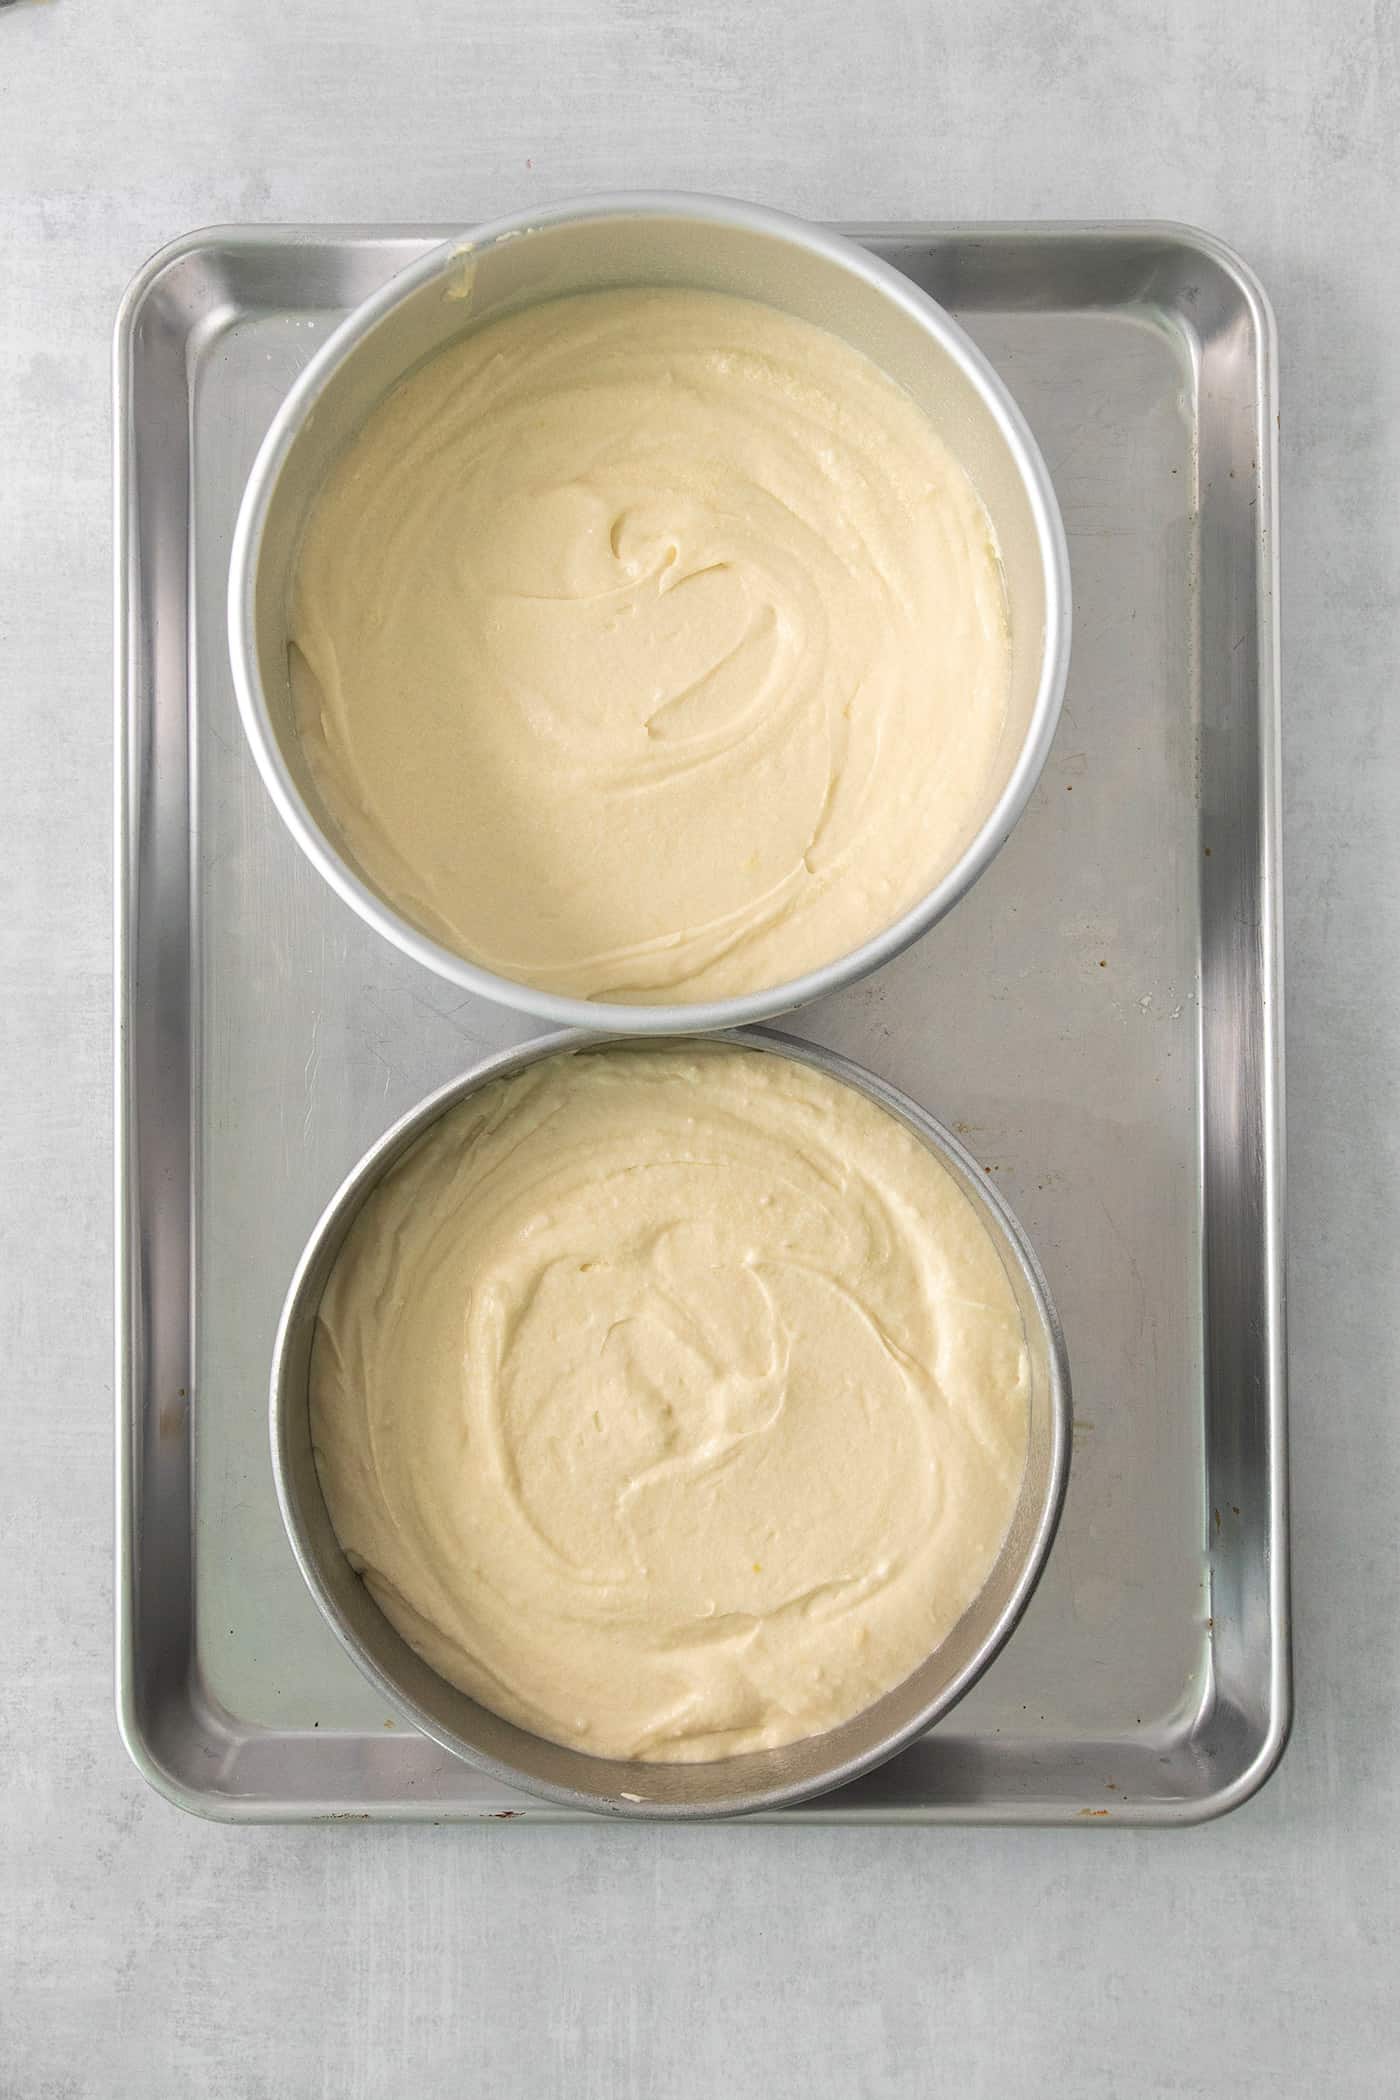 Cake pans filled with batter on a baking sheet.